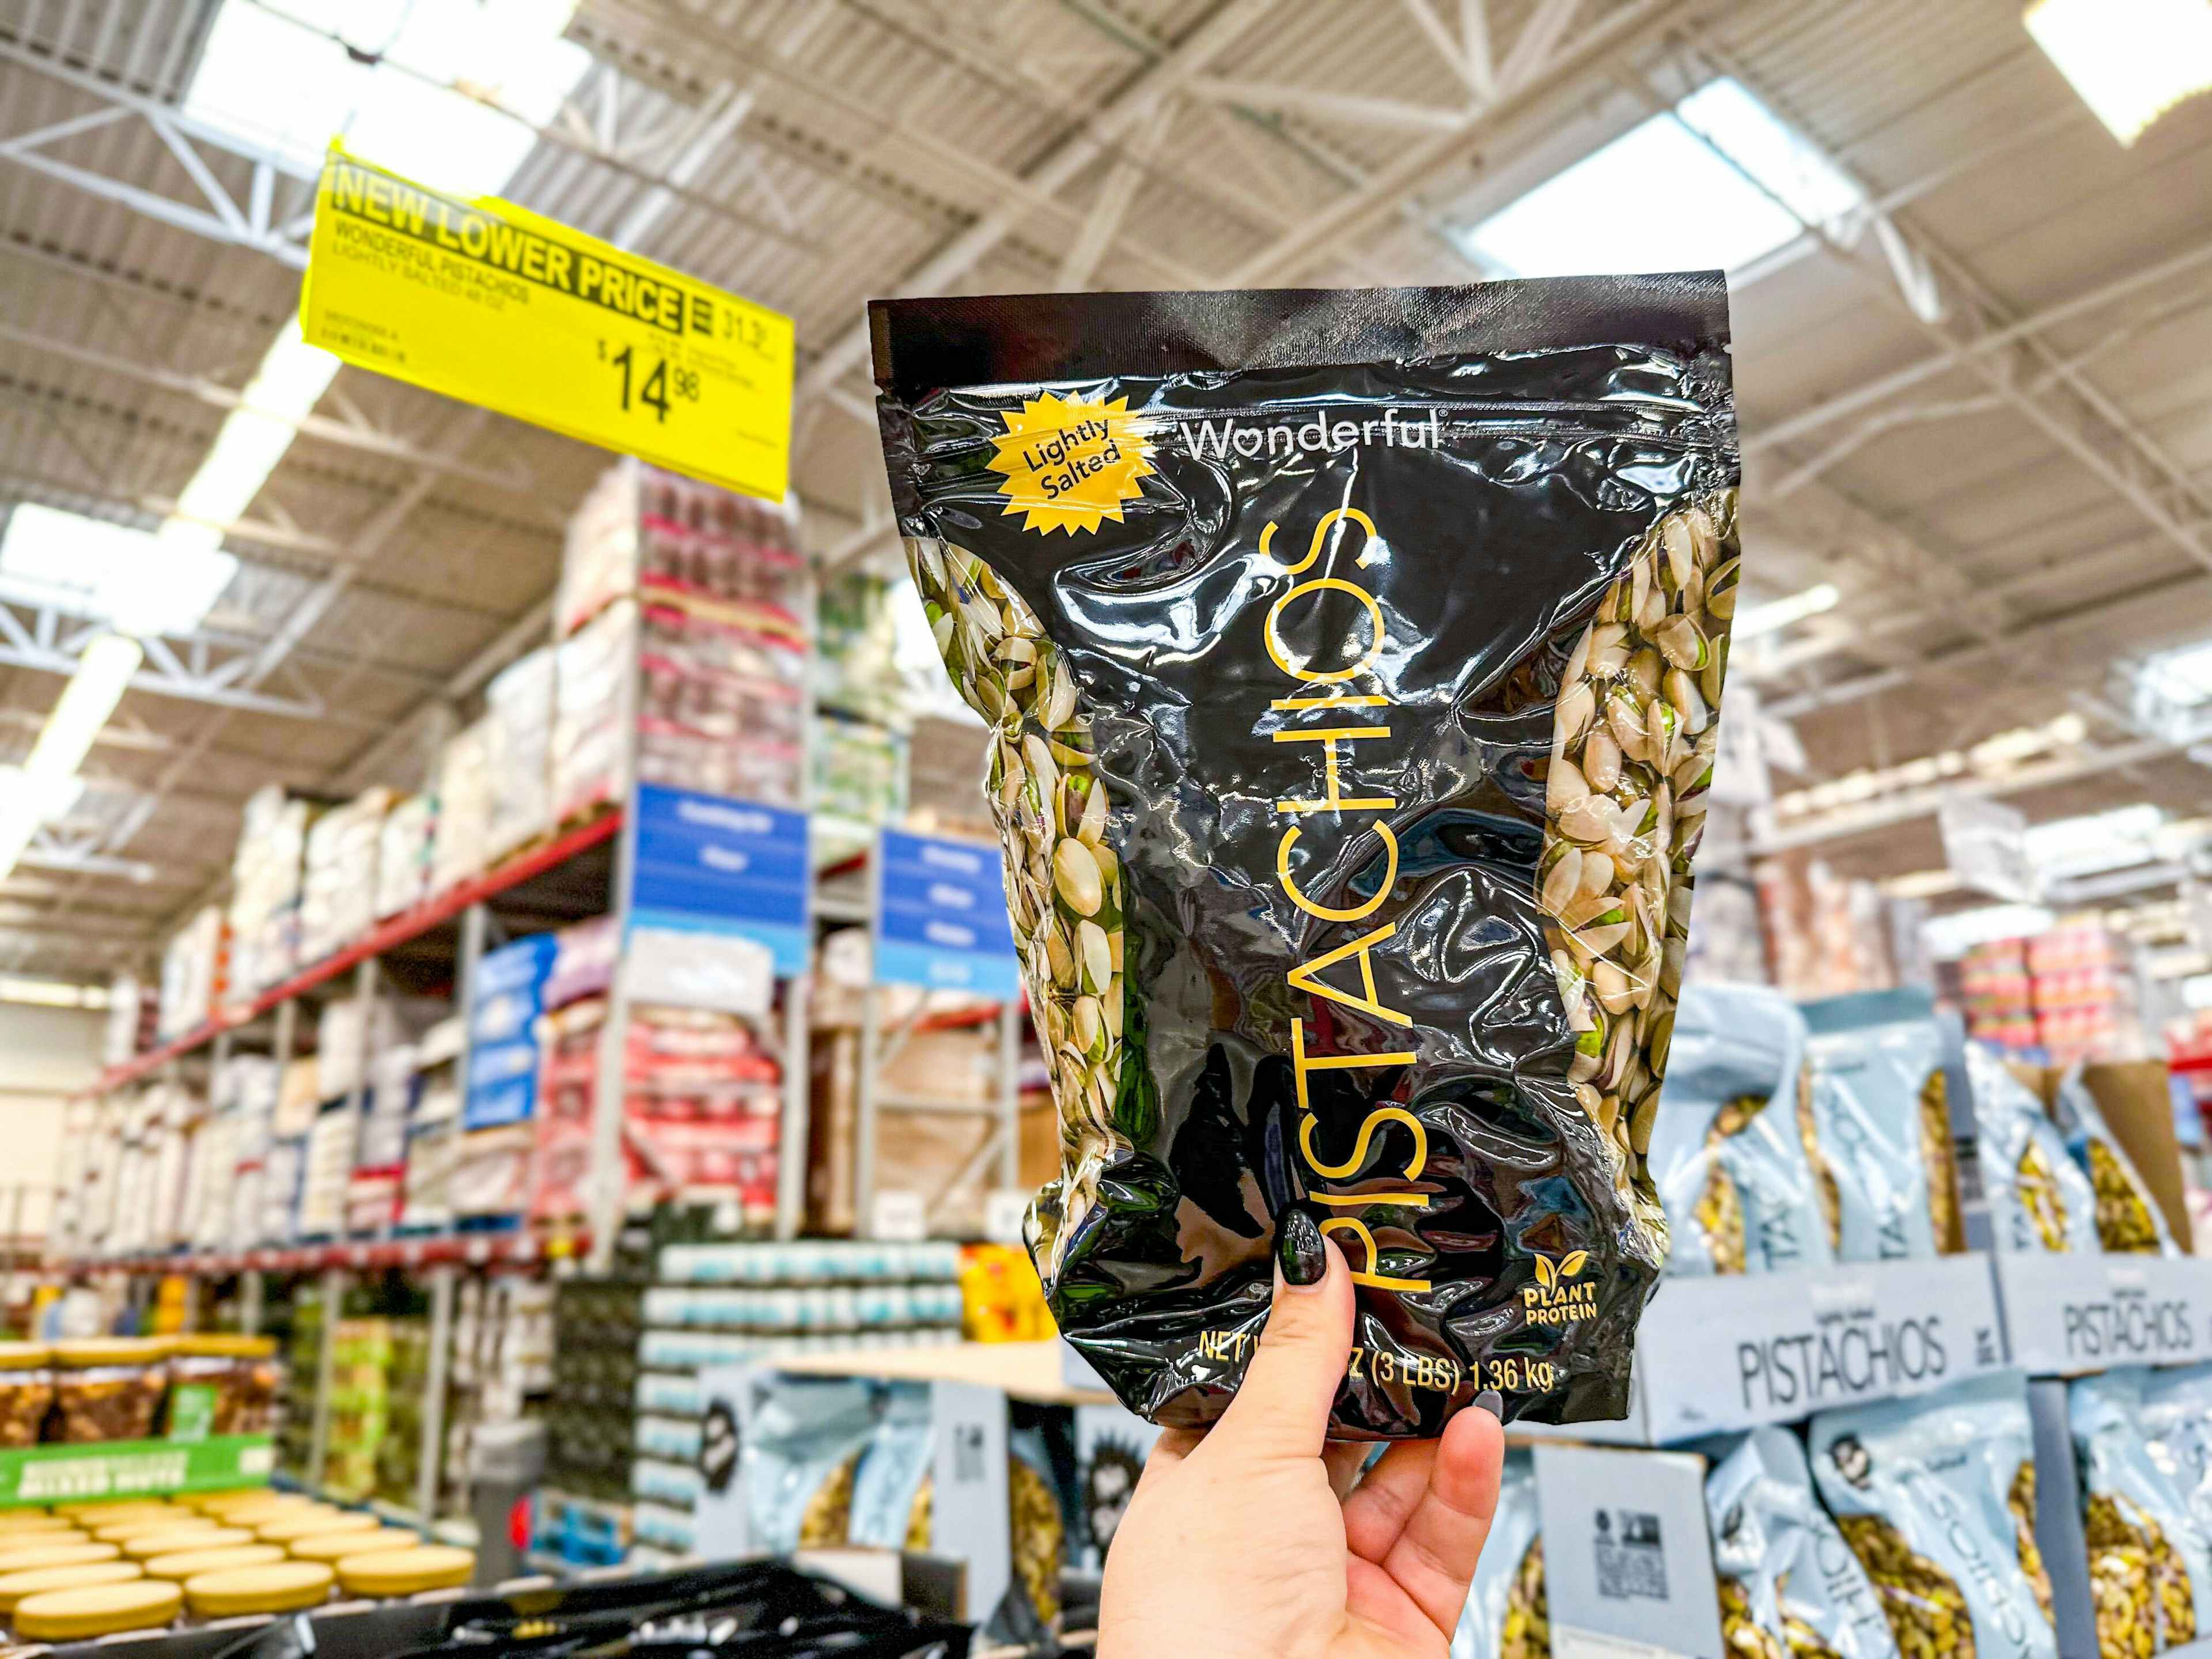 best-things-to-buy-at-sams-club-wonderful-pistachios-kcl-17